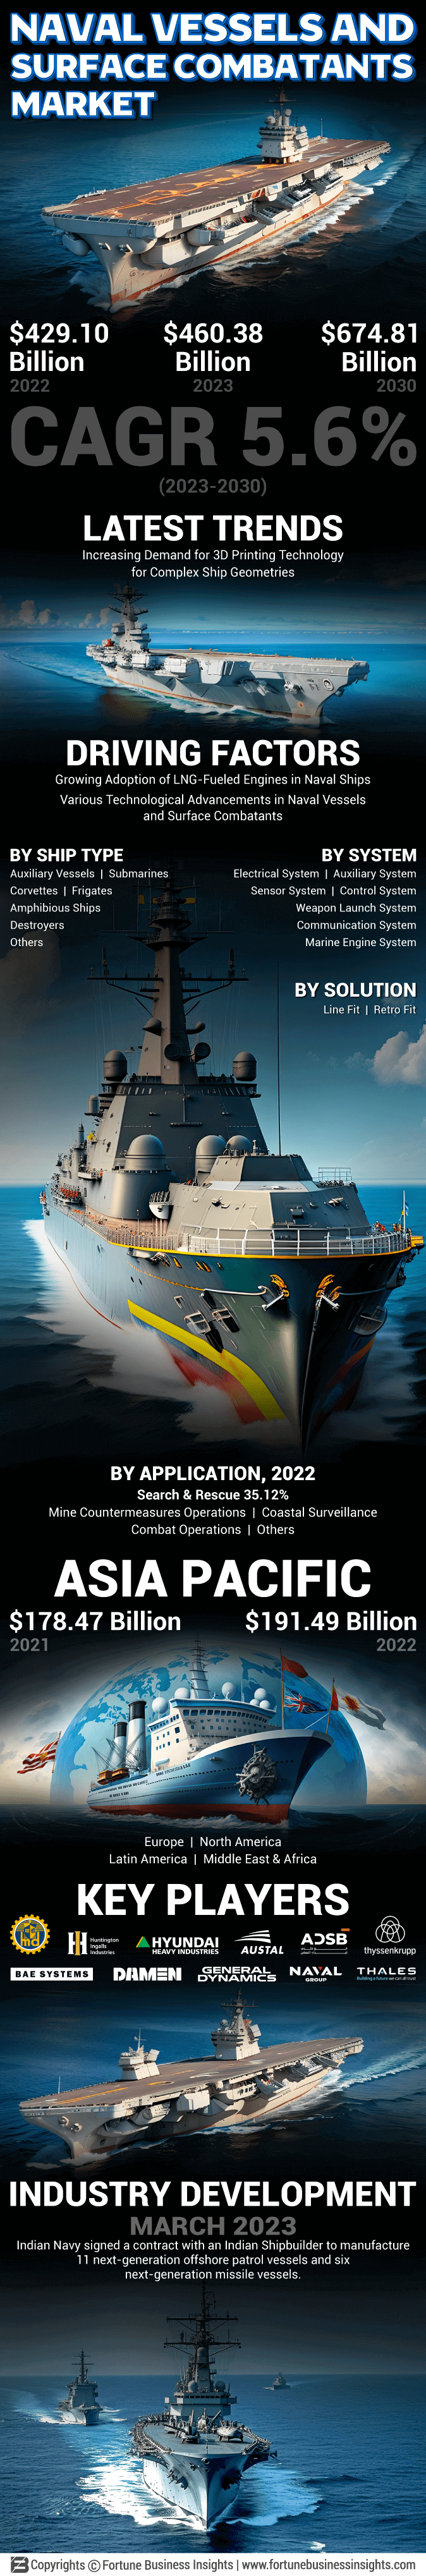 Naval Vessels and Surface Combatants Market